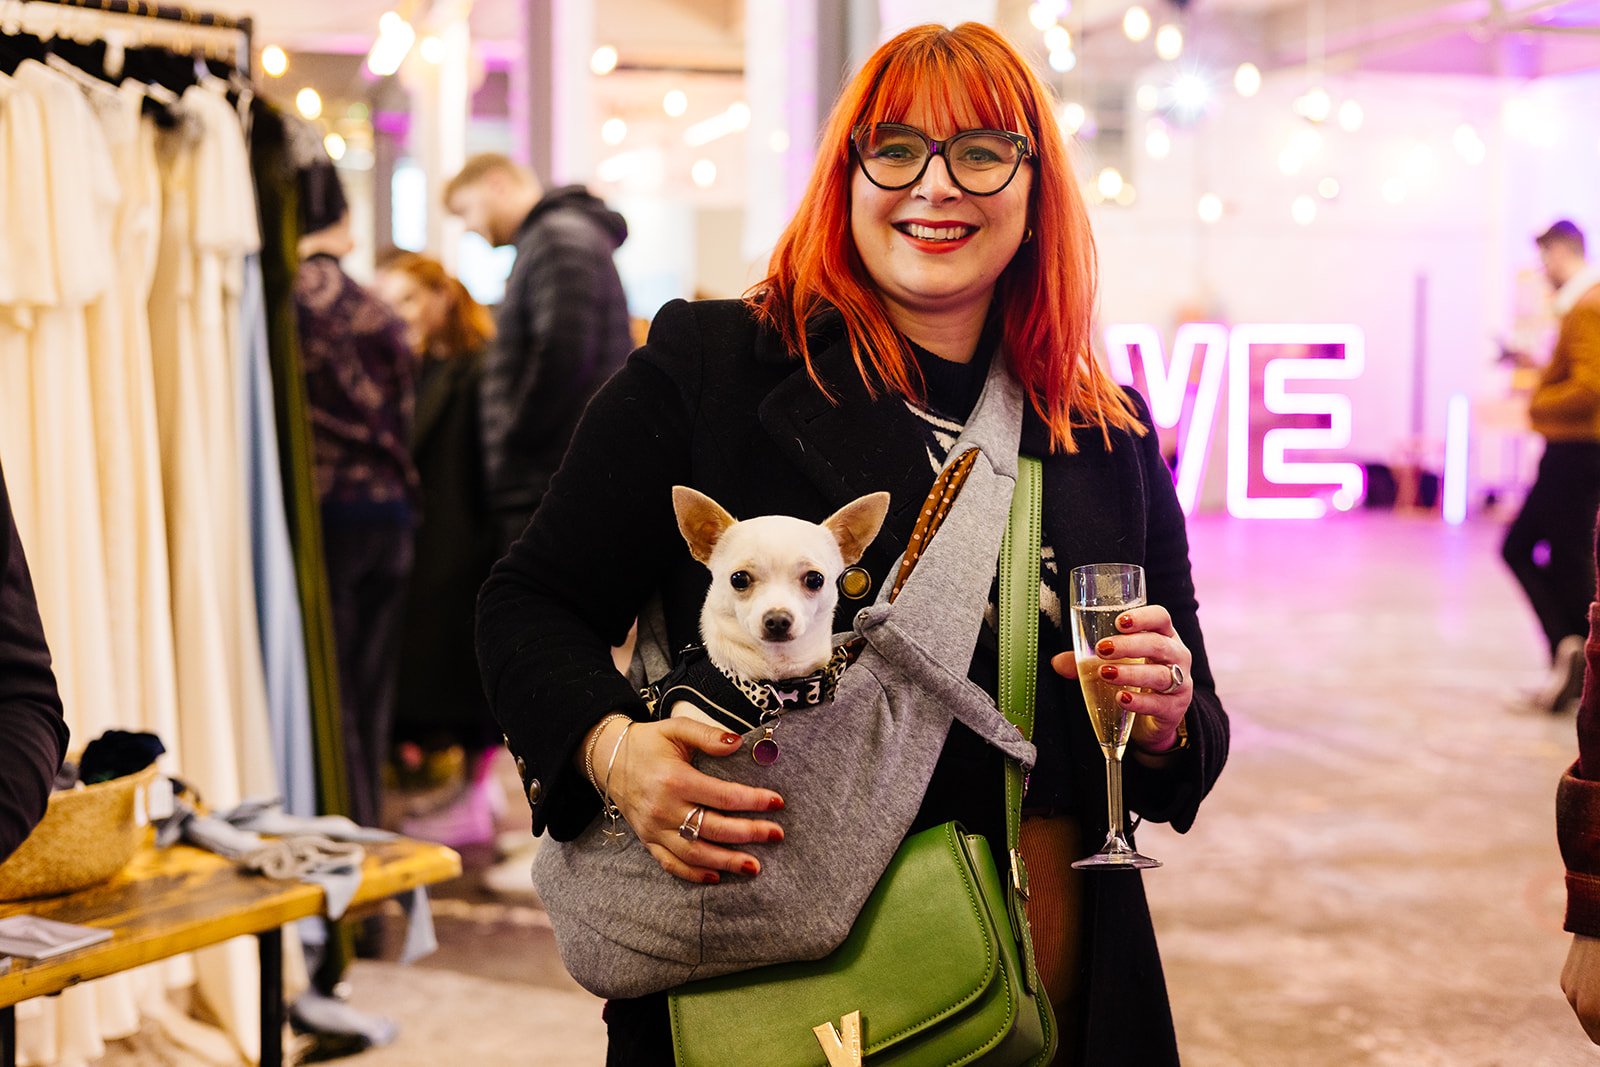  A woman with bright red hair and glasses is holding a glass of champagne and a chihuahua in a sling at The Un-Wedding Show.   